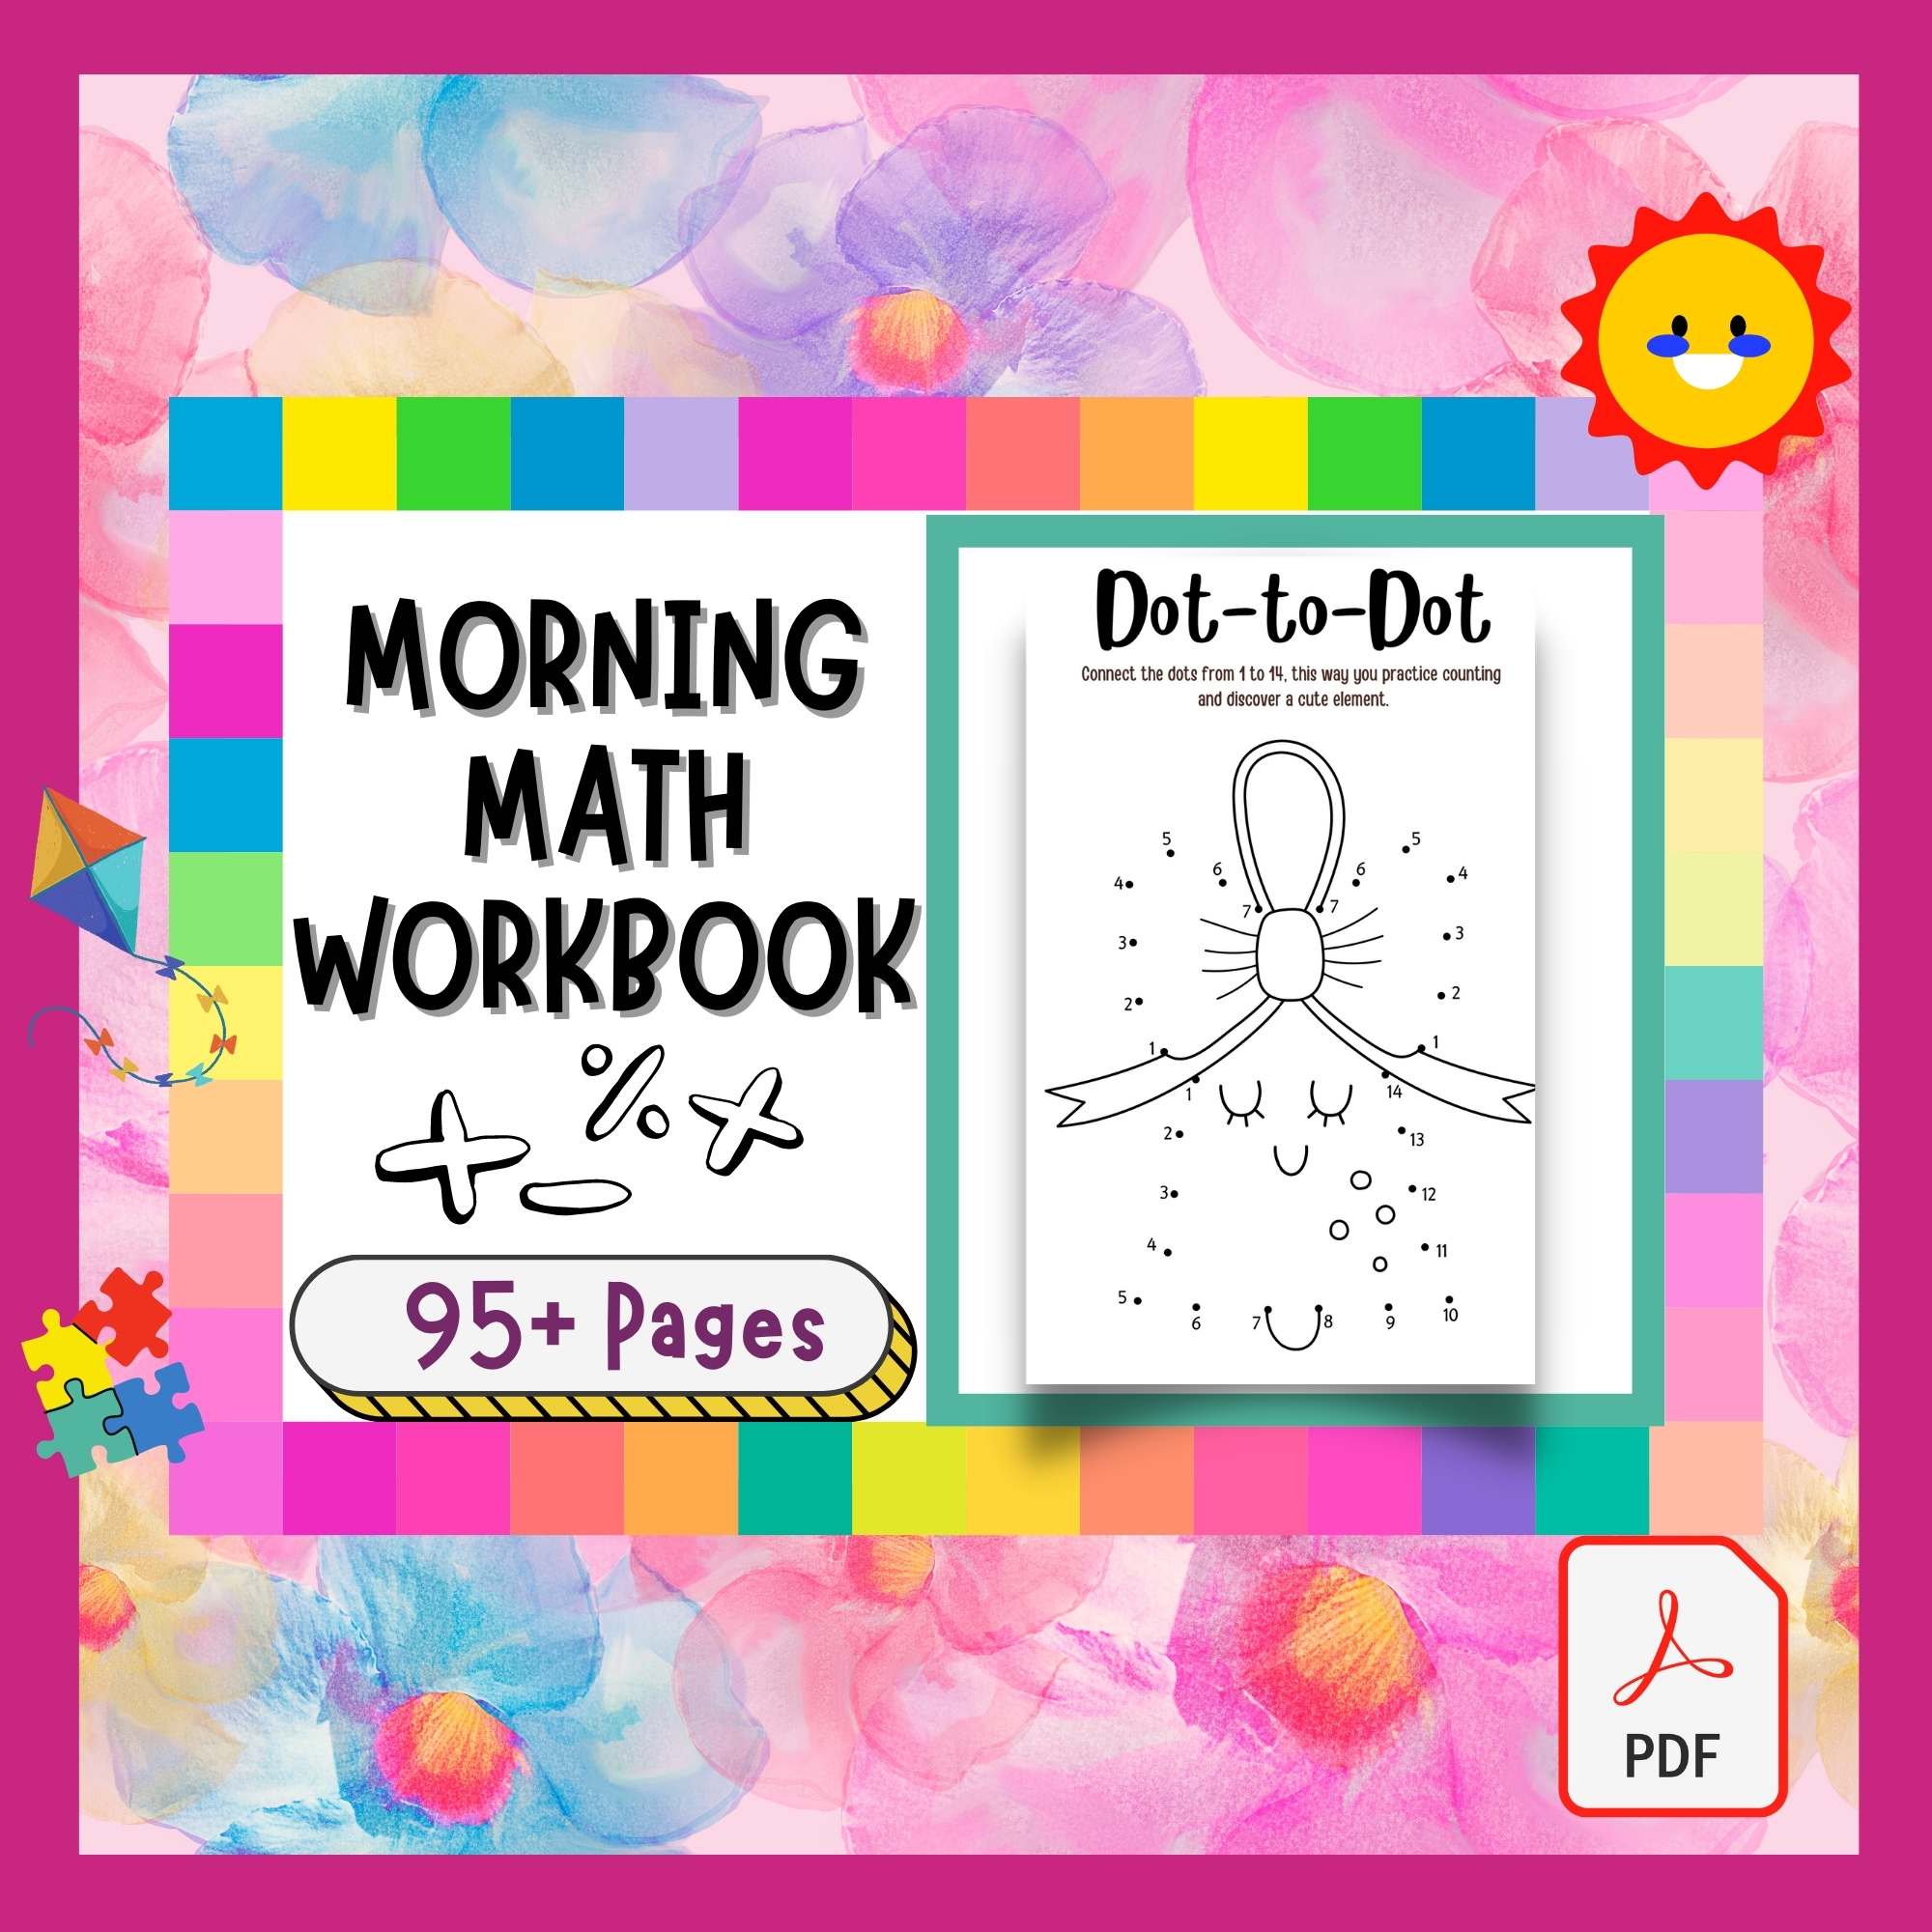 Morning Math Activities For Kids - Worksheets for Practicing Skills & Enrichment preview image.